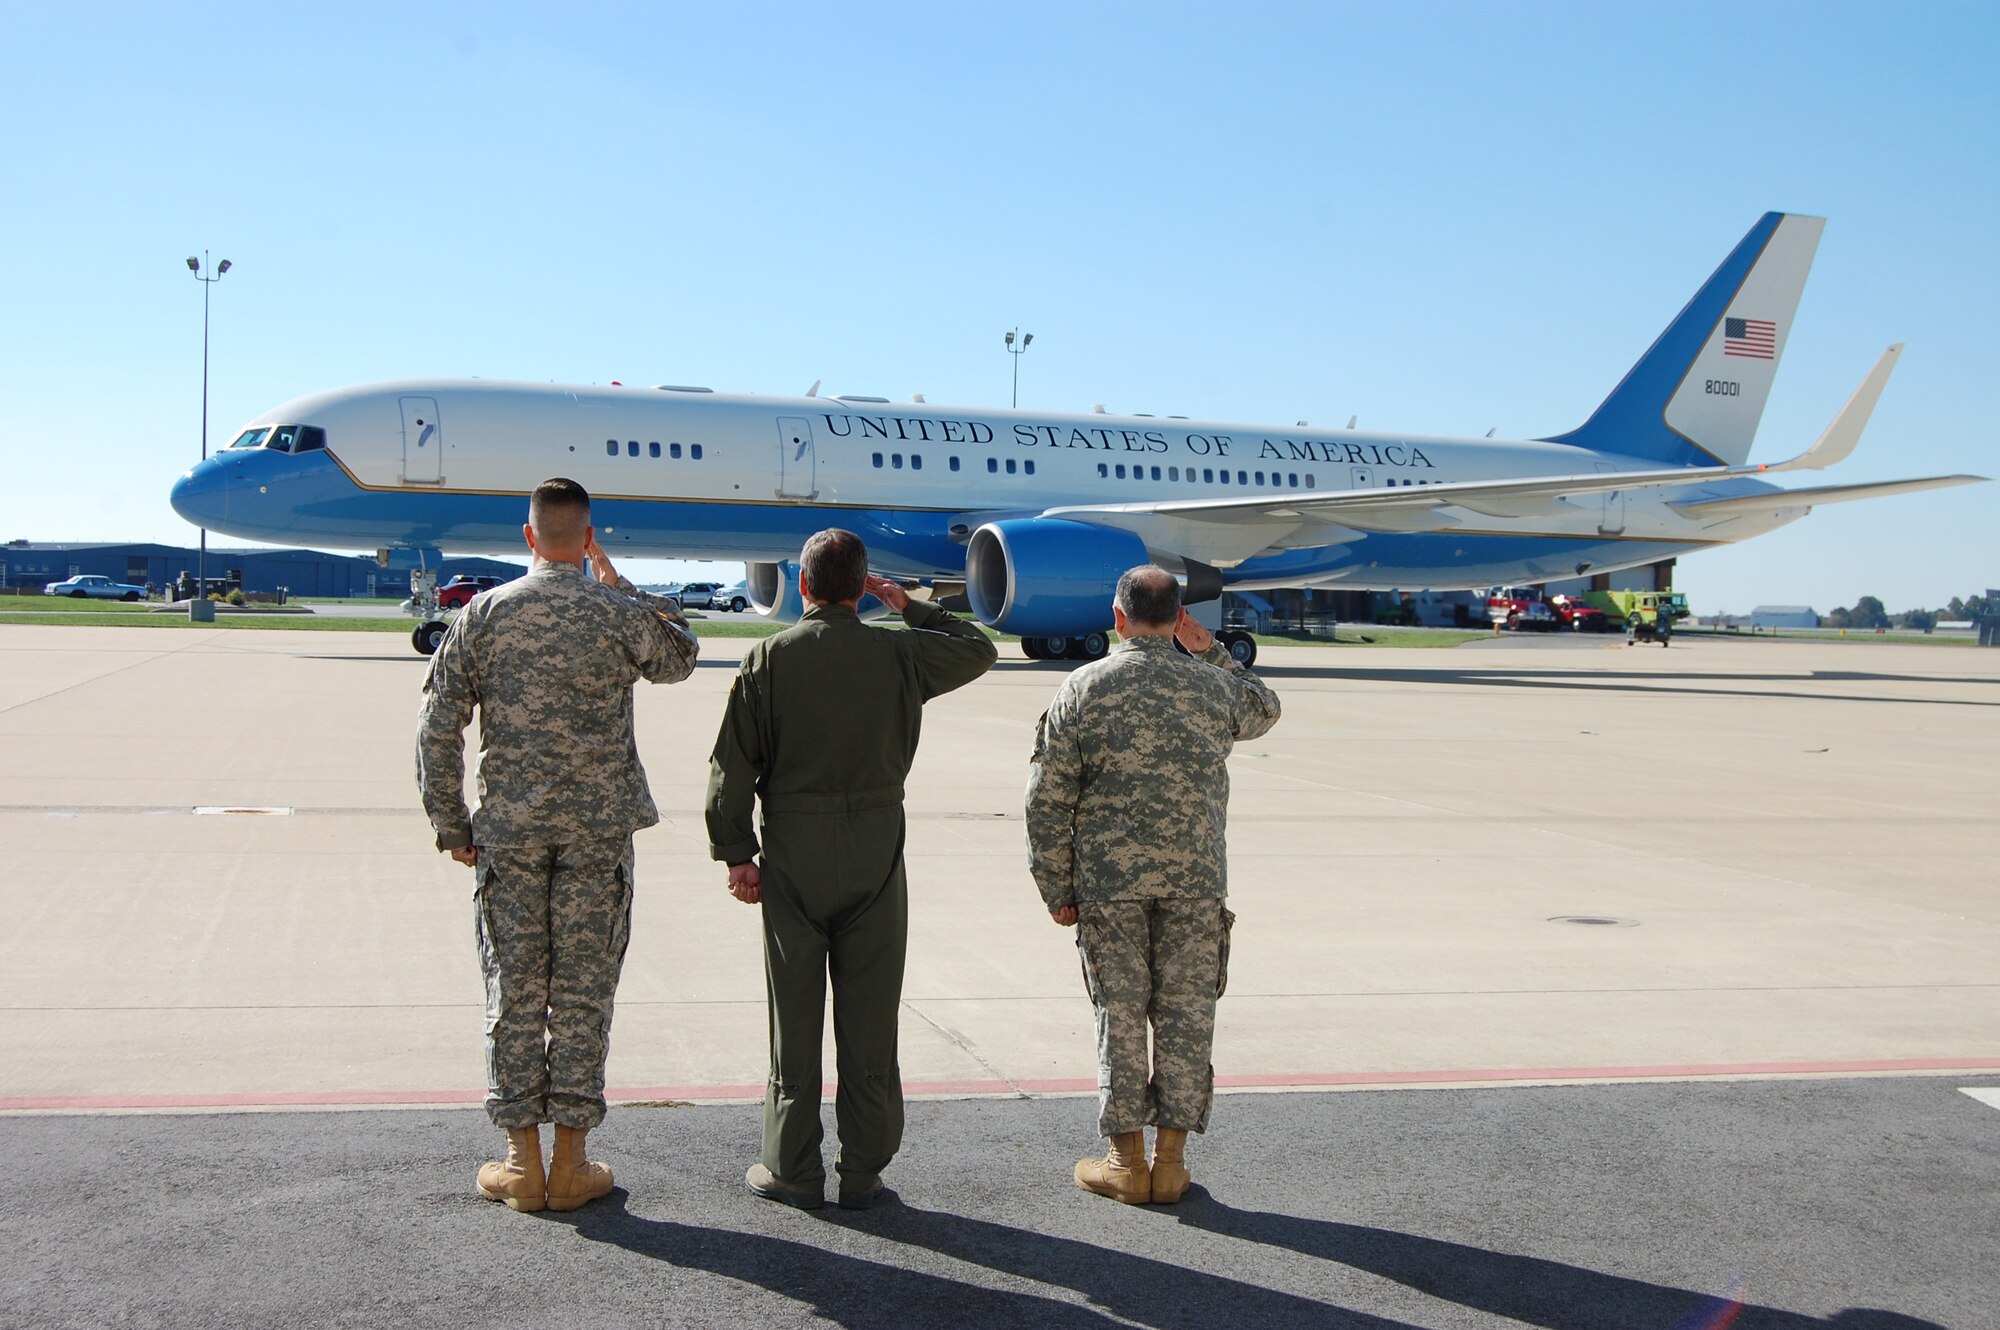 Major Jeff Stowell, executive officer to the Adjutant General, Delaware National Guard, Col. Mike Feeley, commander, 166th Airlift Wing, Delaware Air National Guard, and Maj. Gen. Frank D. Vavala, The Adjutant General, Delaware National Guard, salute Air Force Two as the aircraft carrying Vice President Joe Biden prepares for takeoff at the New Castle Air National Guard Base, Delaware on October 11, 2012 for a flight to Lexington Blue Grass Airport, in Lexington, Ky., for tonight’s vice presidential debate in nearby Danville, Ky. (U.S. Air Force photo/Tech. Sgt. Benjamin Matwey)